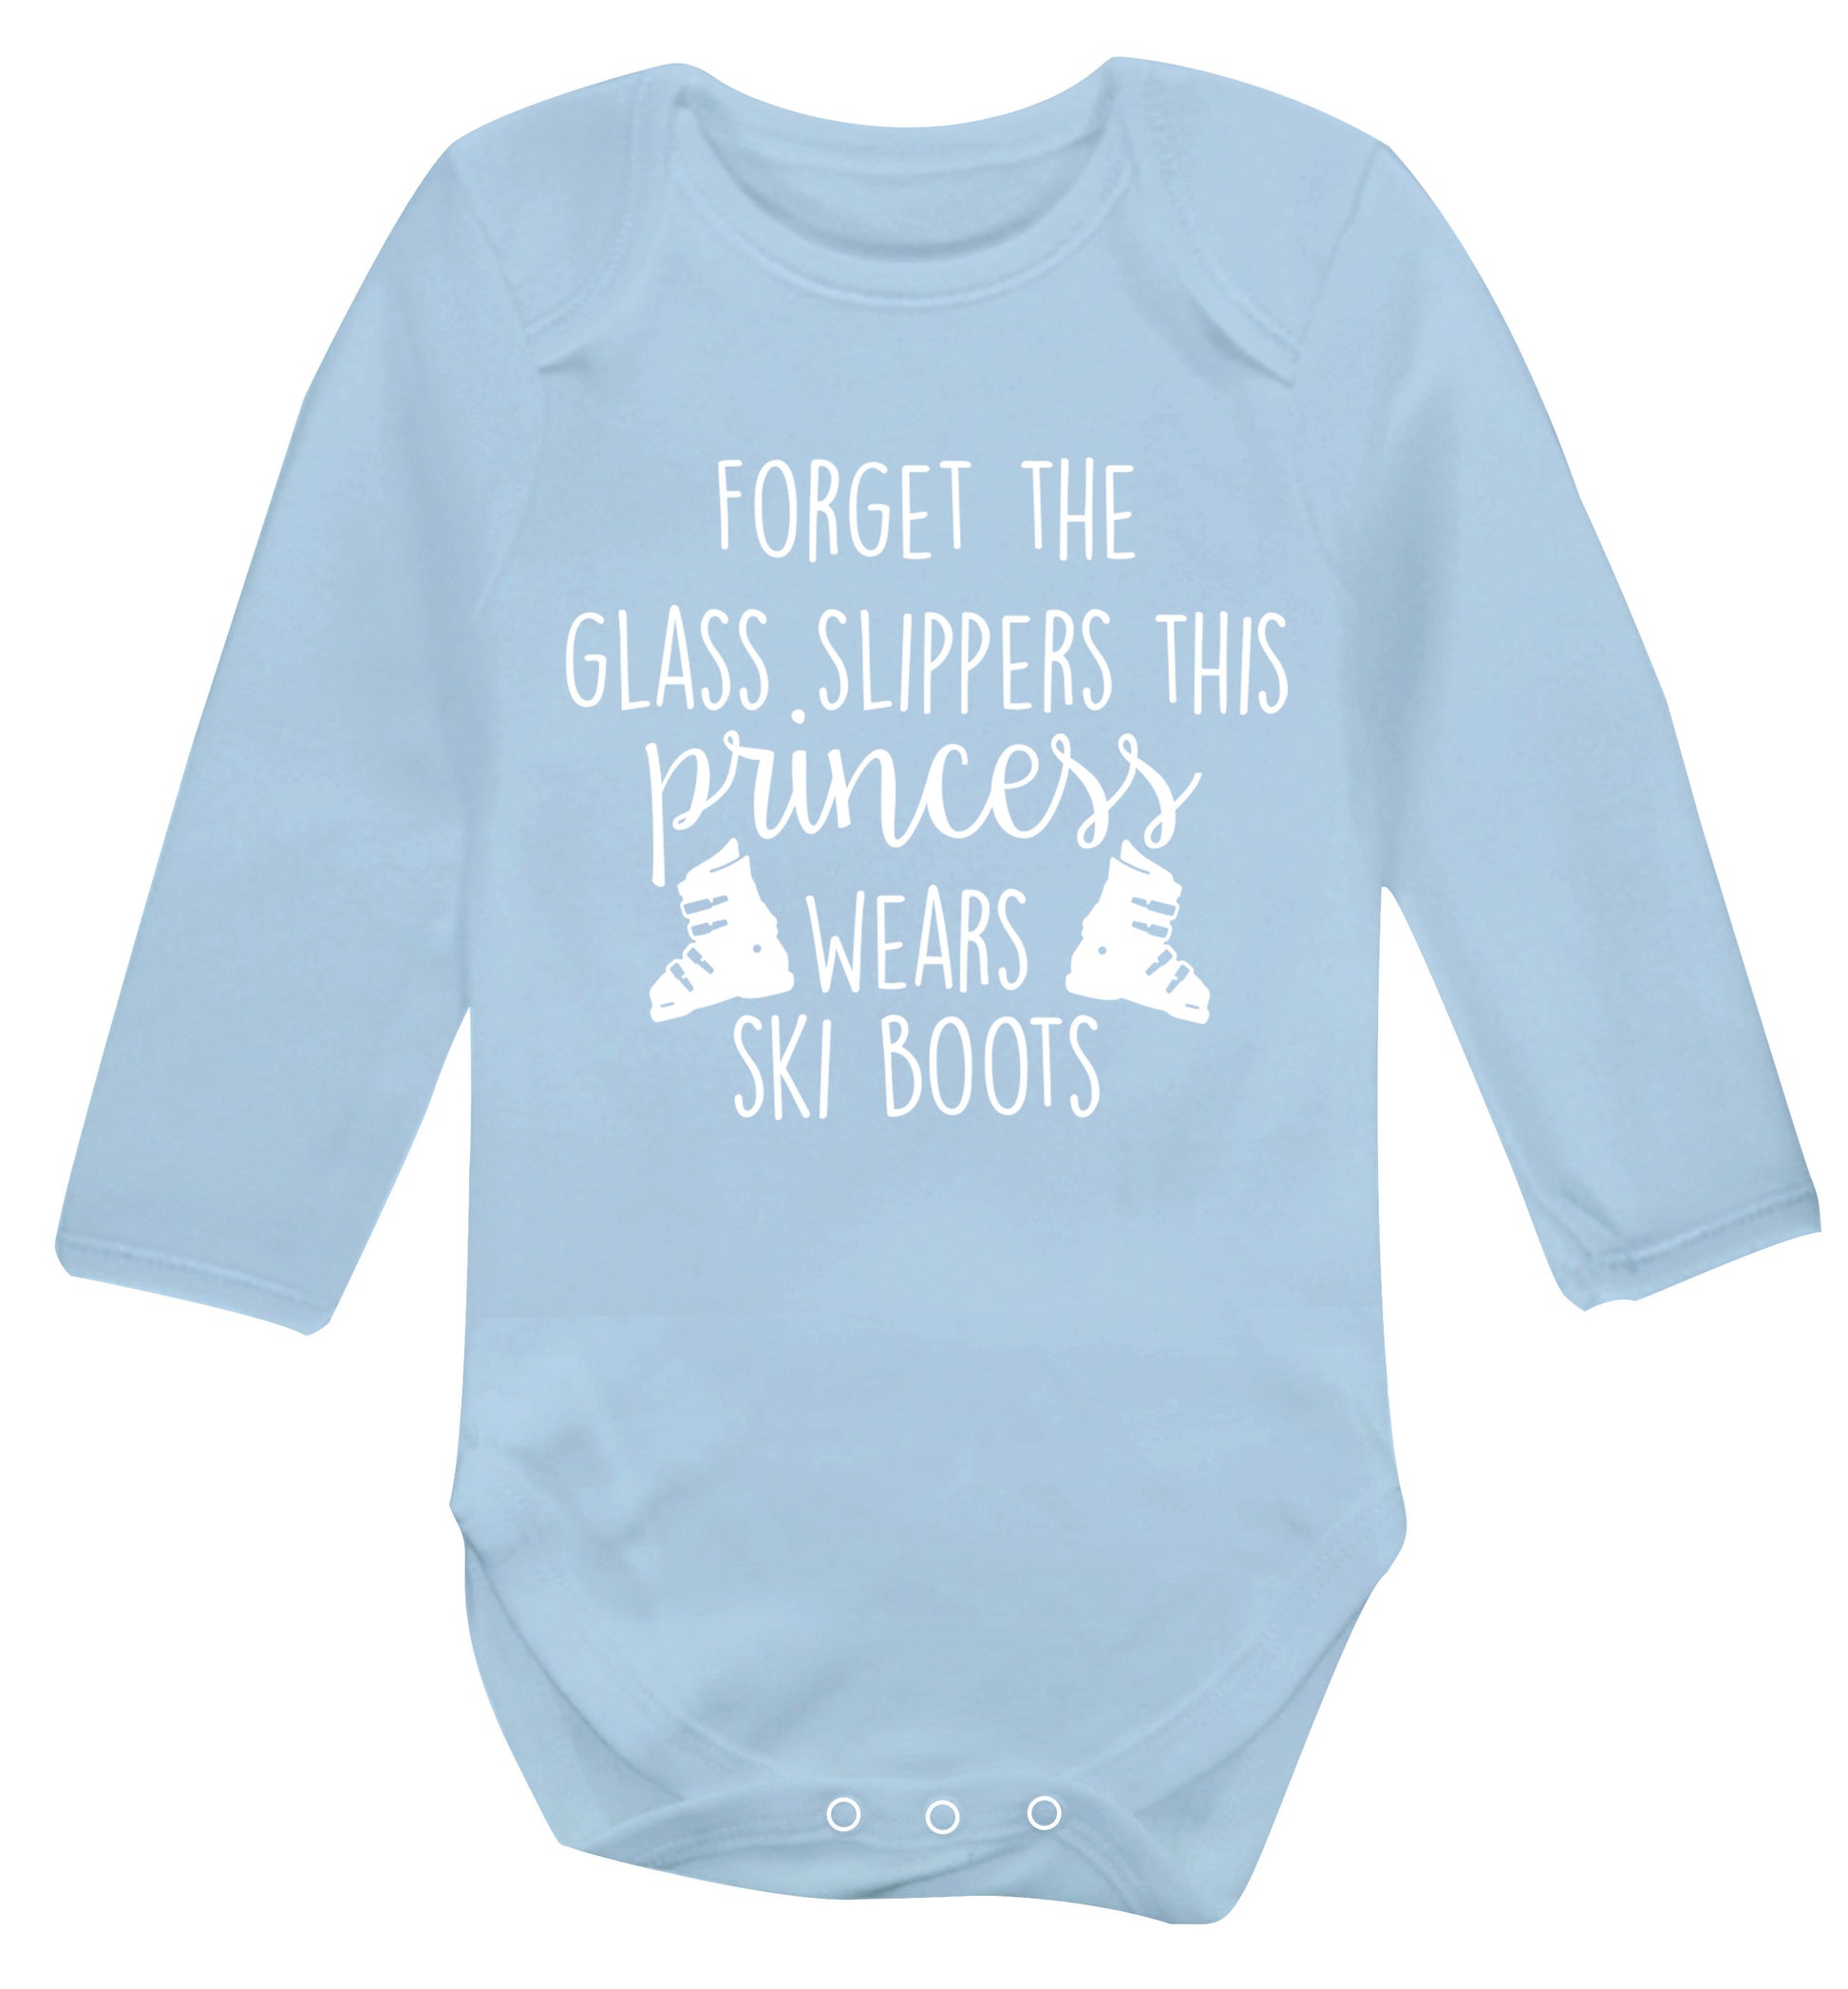 Forget the glass slippers this princess wears ski boots Baby Vest long sleeved pale blue 6-12 months